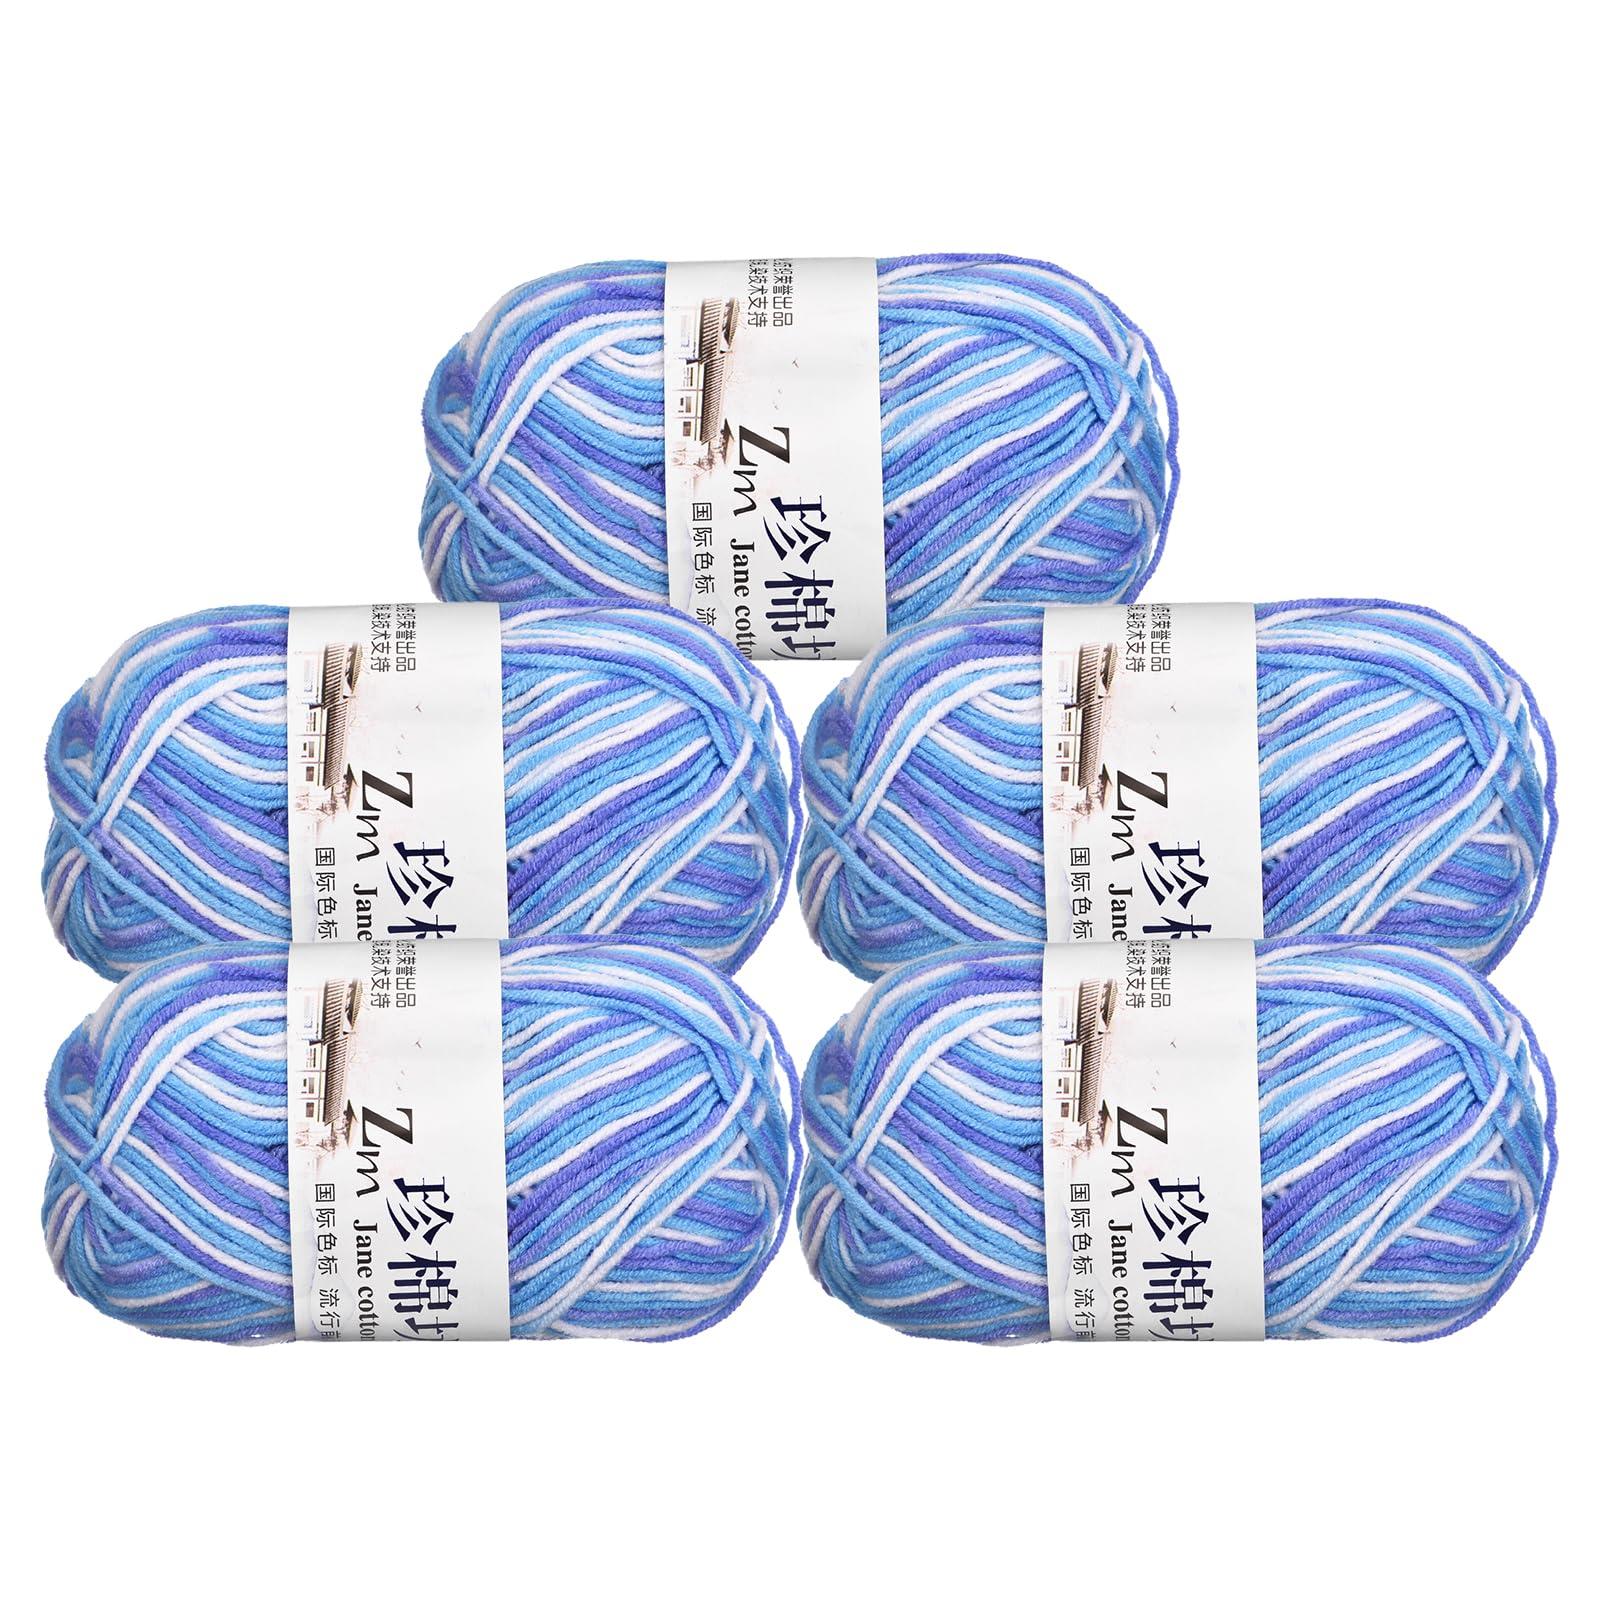 sourcing map Cotton Blend Yarn, 5 Pack of 50g/1.76oz Soft Crochet Craft Yarns for Knitting and Crocheting Craft Projects, Blue